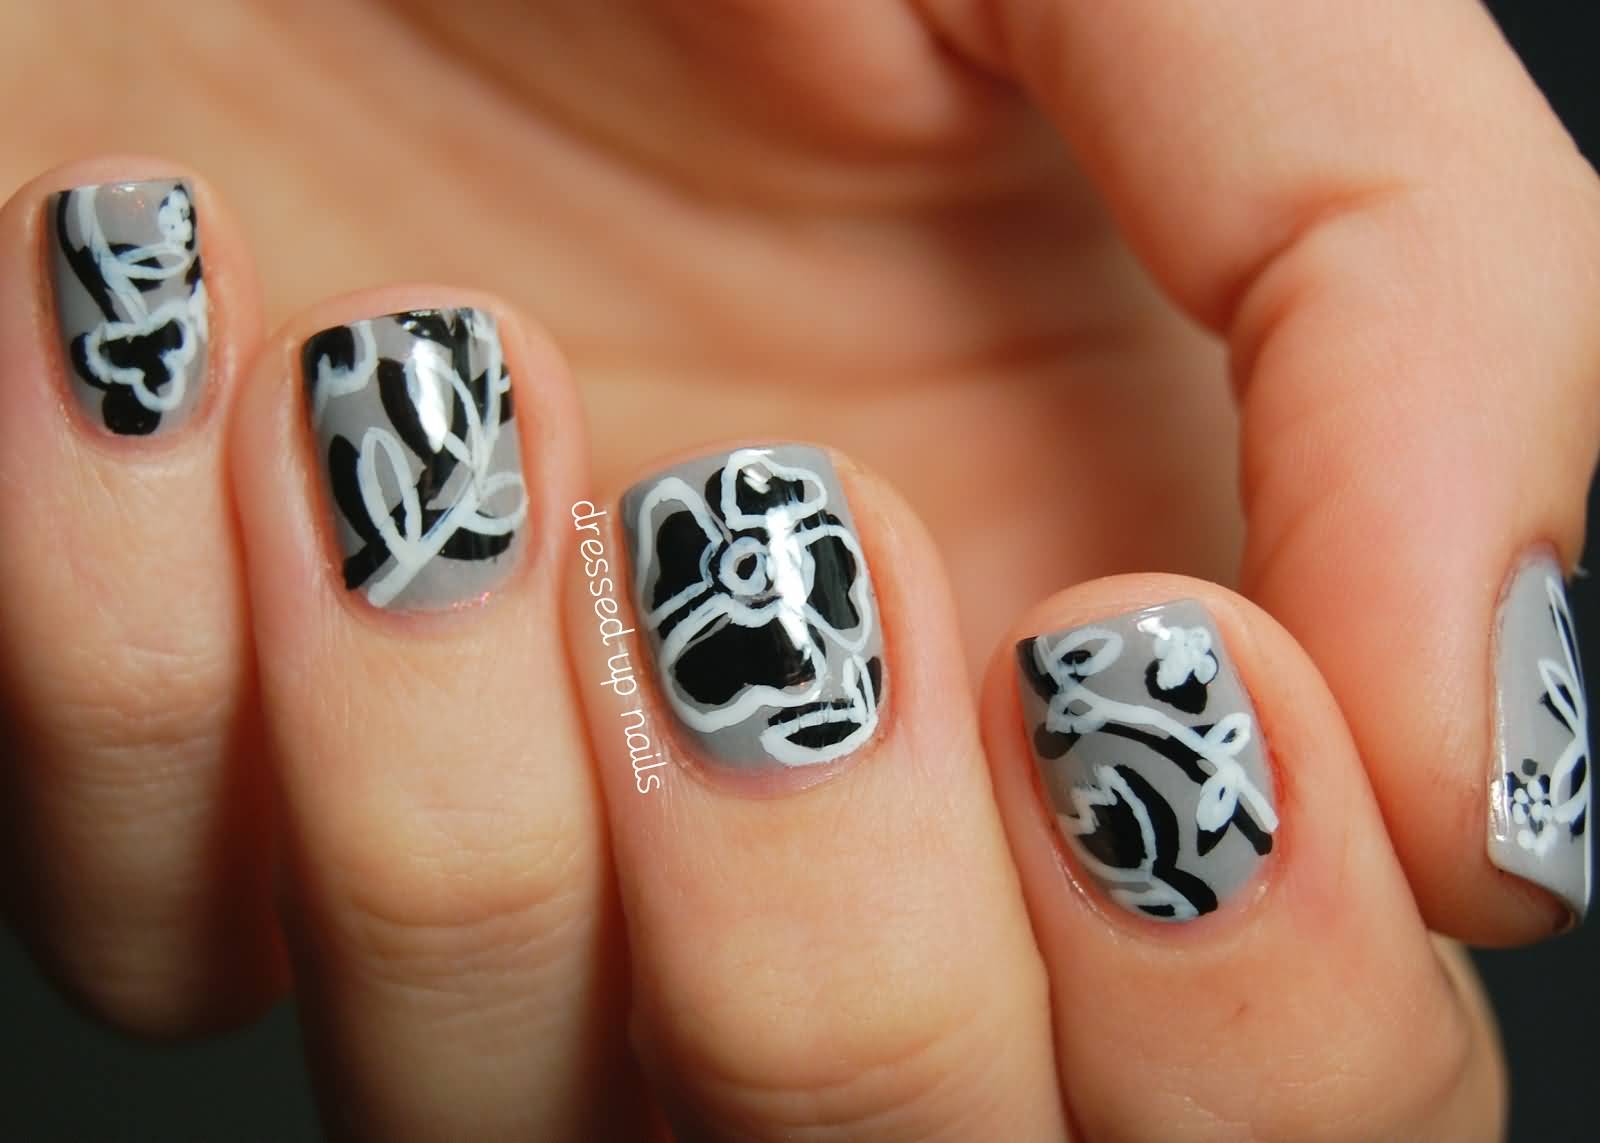 Gray Base Nails With Black And White Floral Design Nail Art Idea